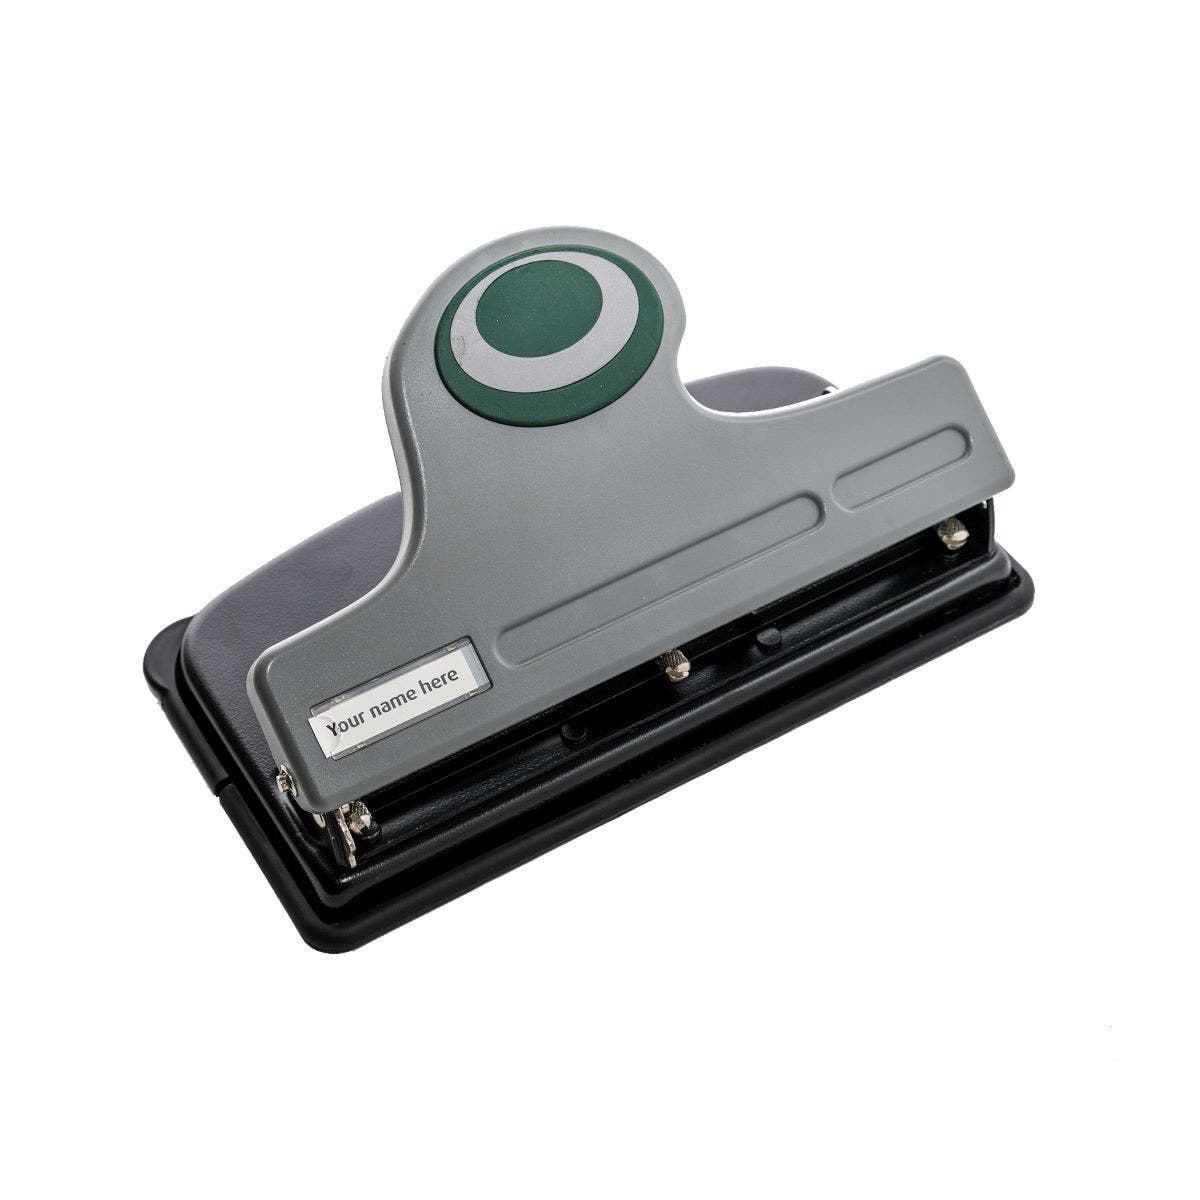 50-Sheet Deluxe Two-Hole Punch, 1/4 Holes, Gray/Blue - Reliable Paper